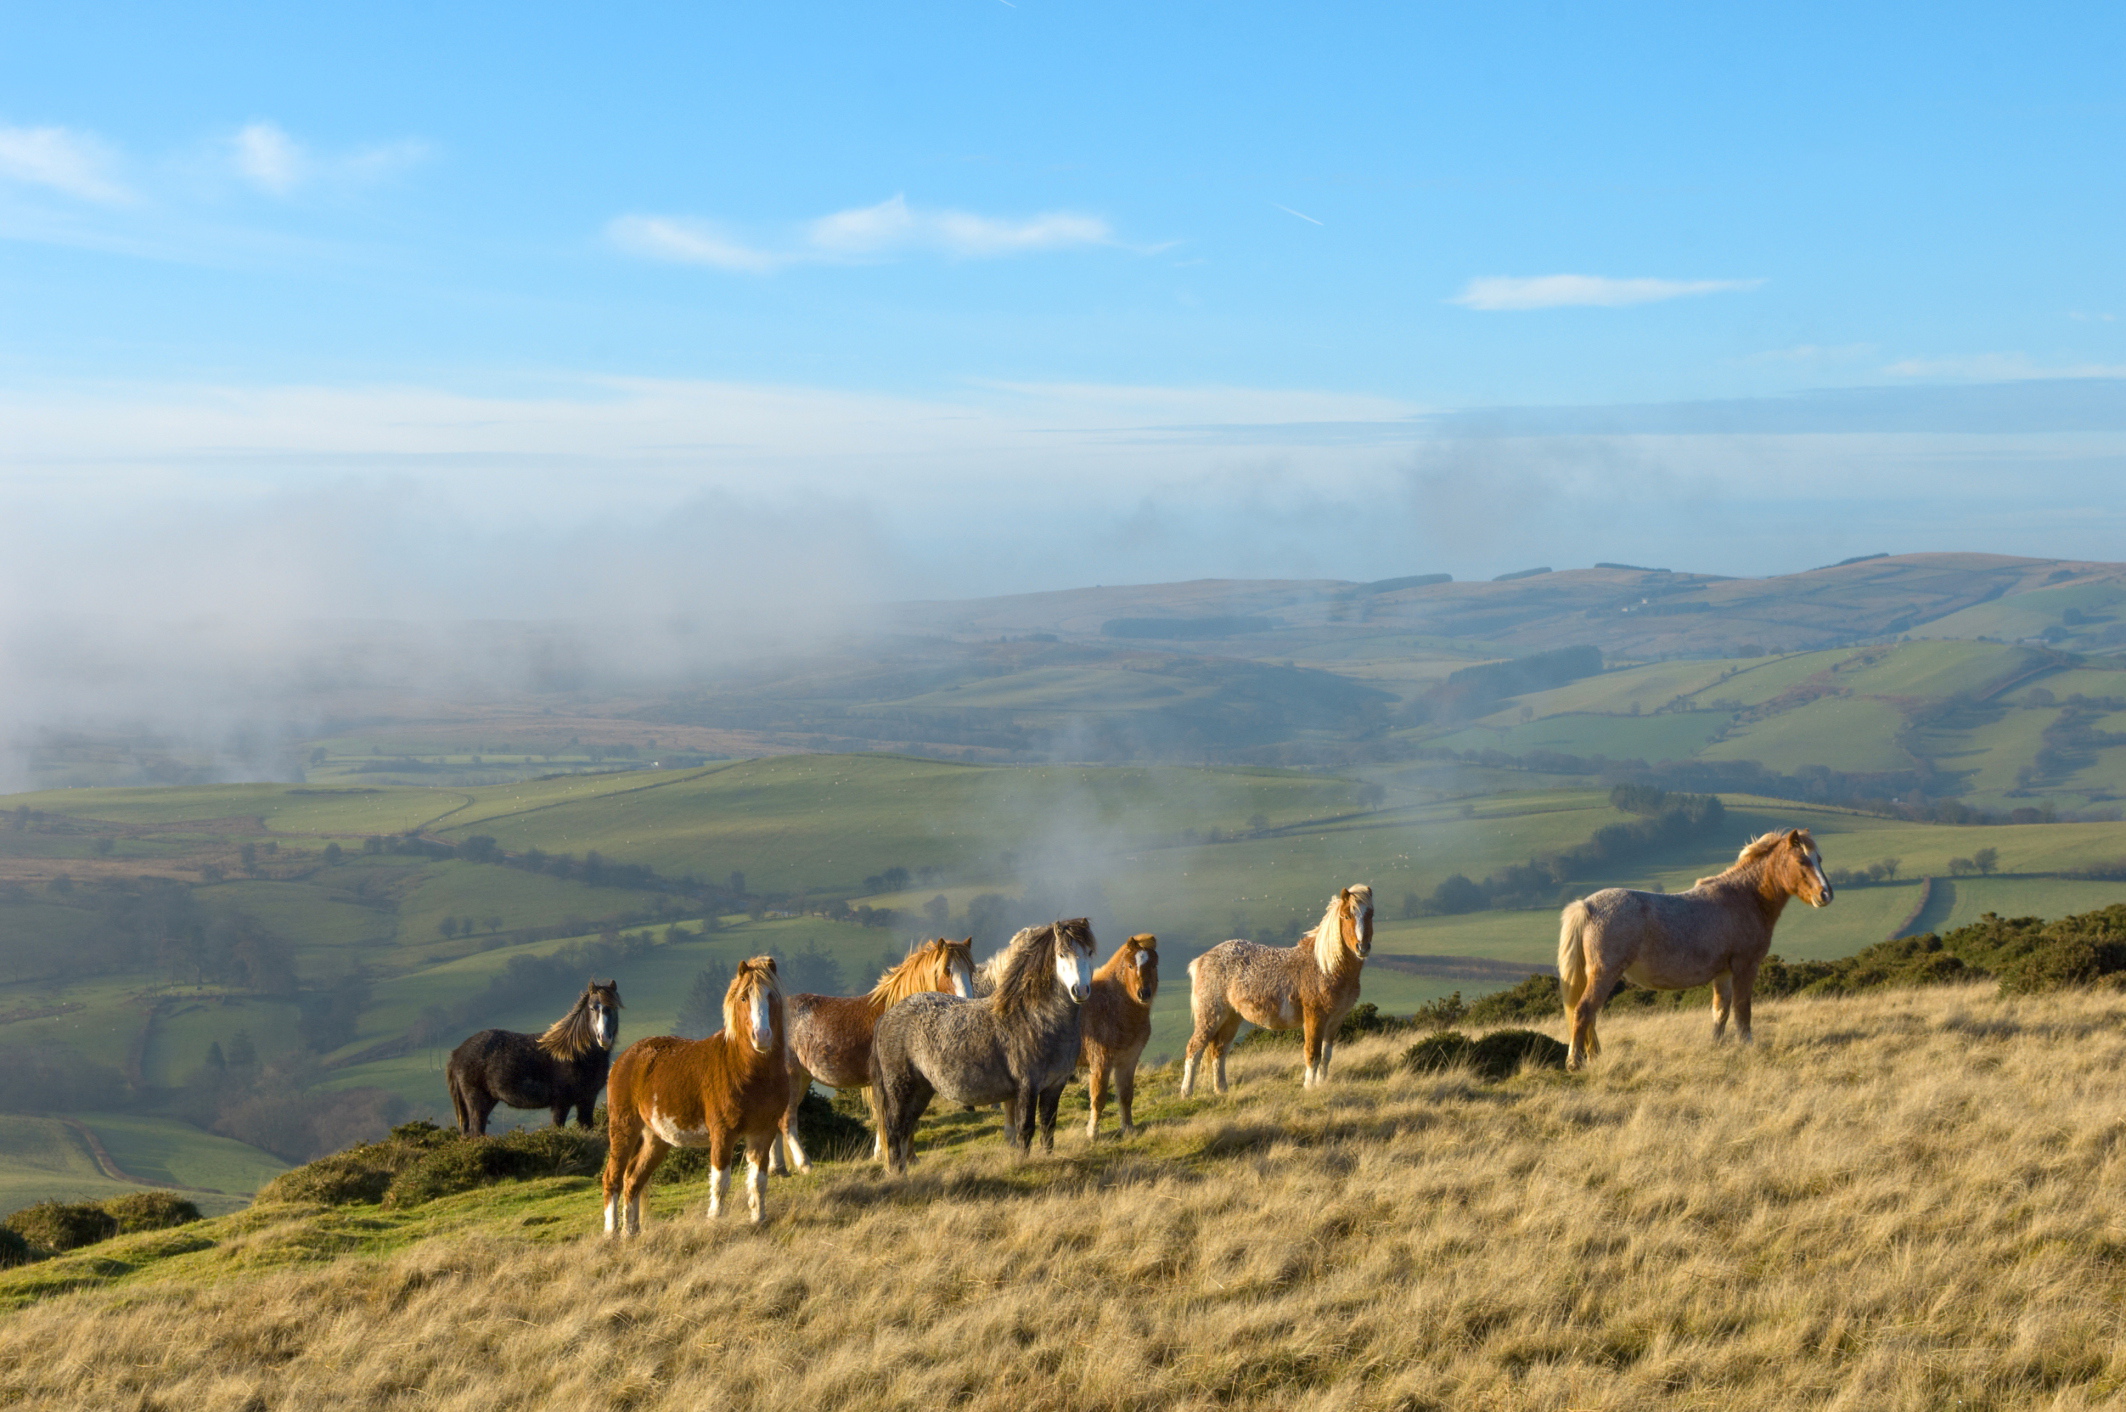 Ponies in Mynydd Epynt, The Cambrian Mountains. Image by Graham Lawrence / Getty